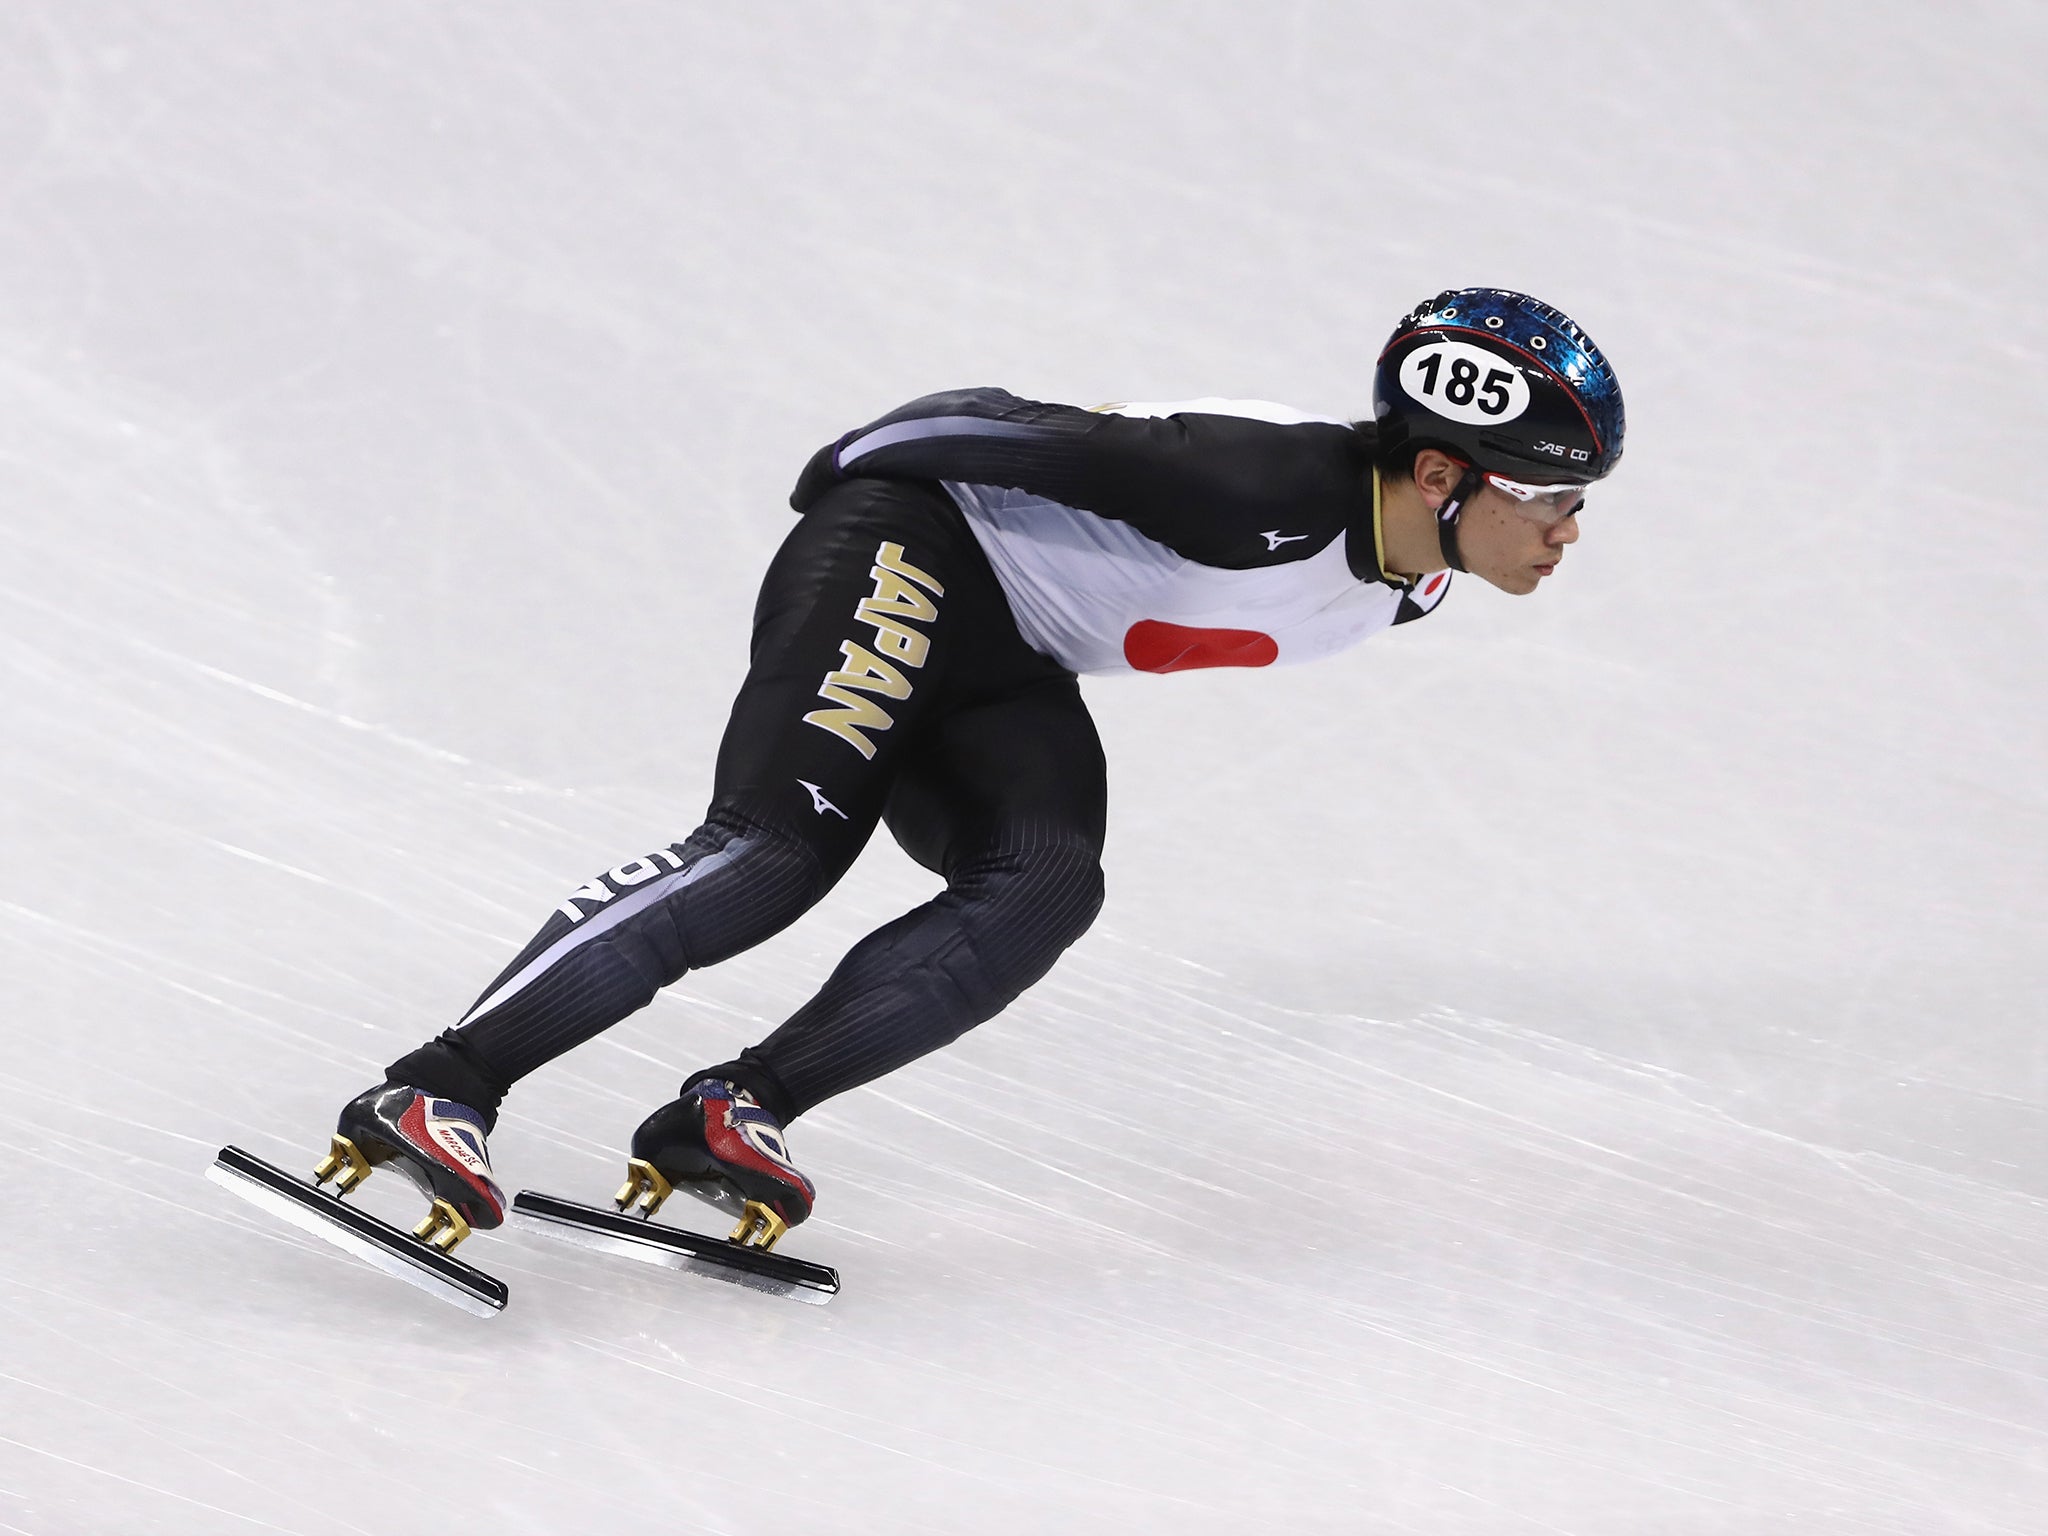 Kei Saito has been sent home from the Winter Olympics after testing positive for a banned substance